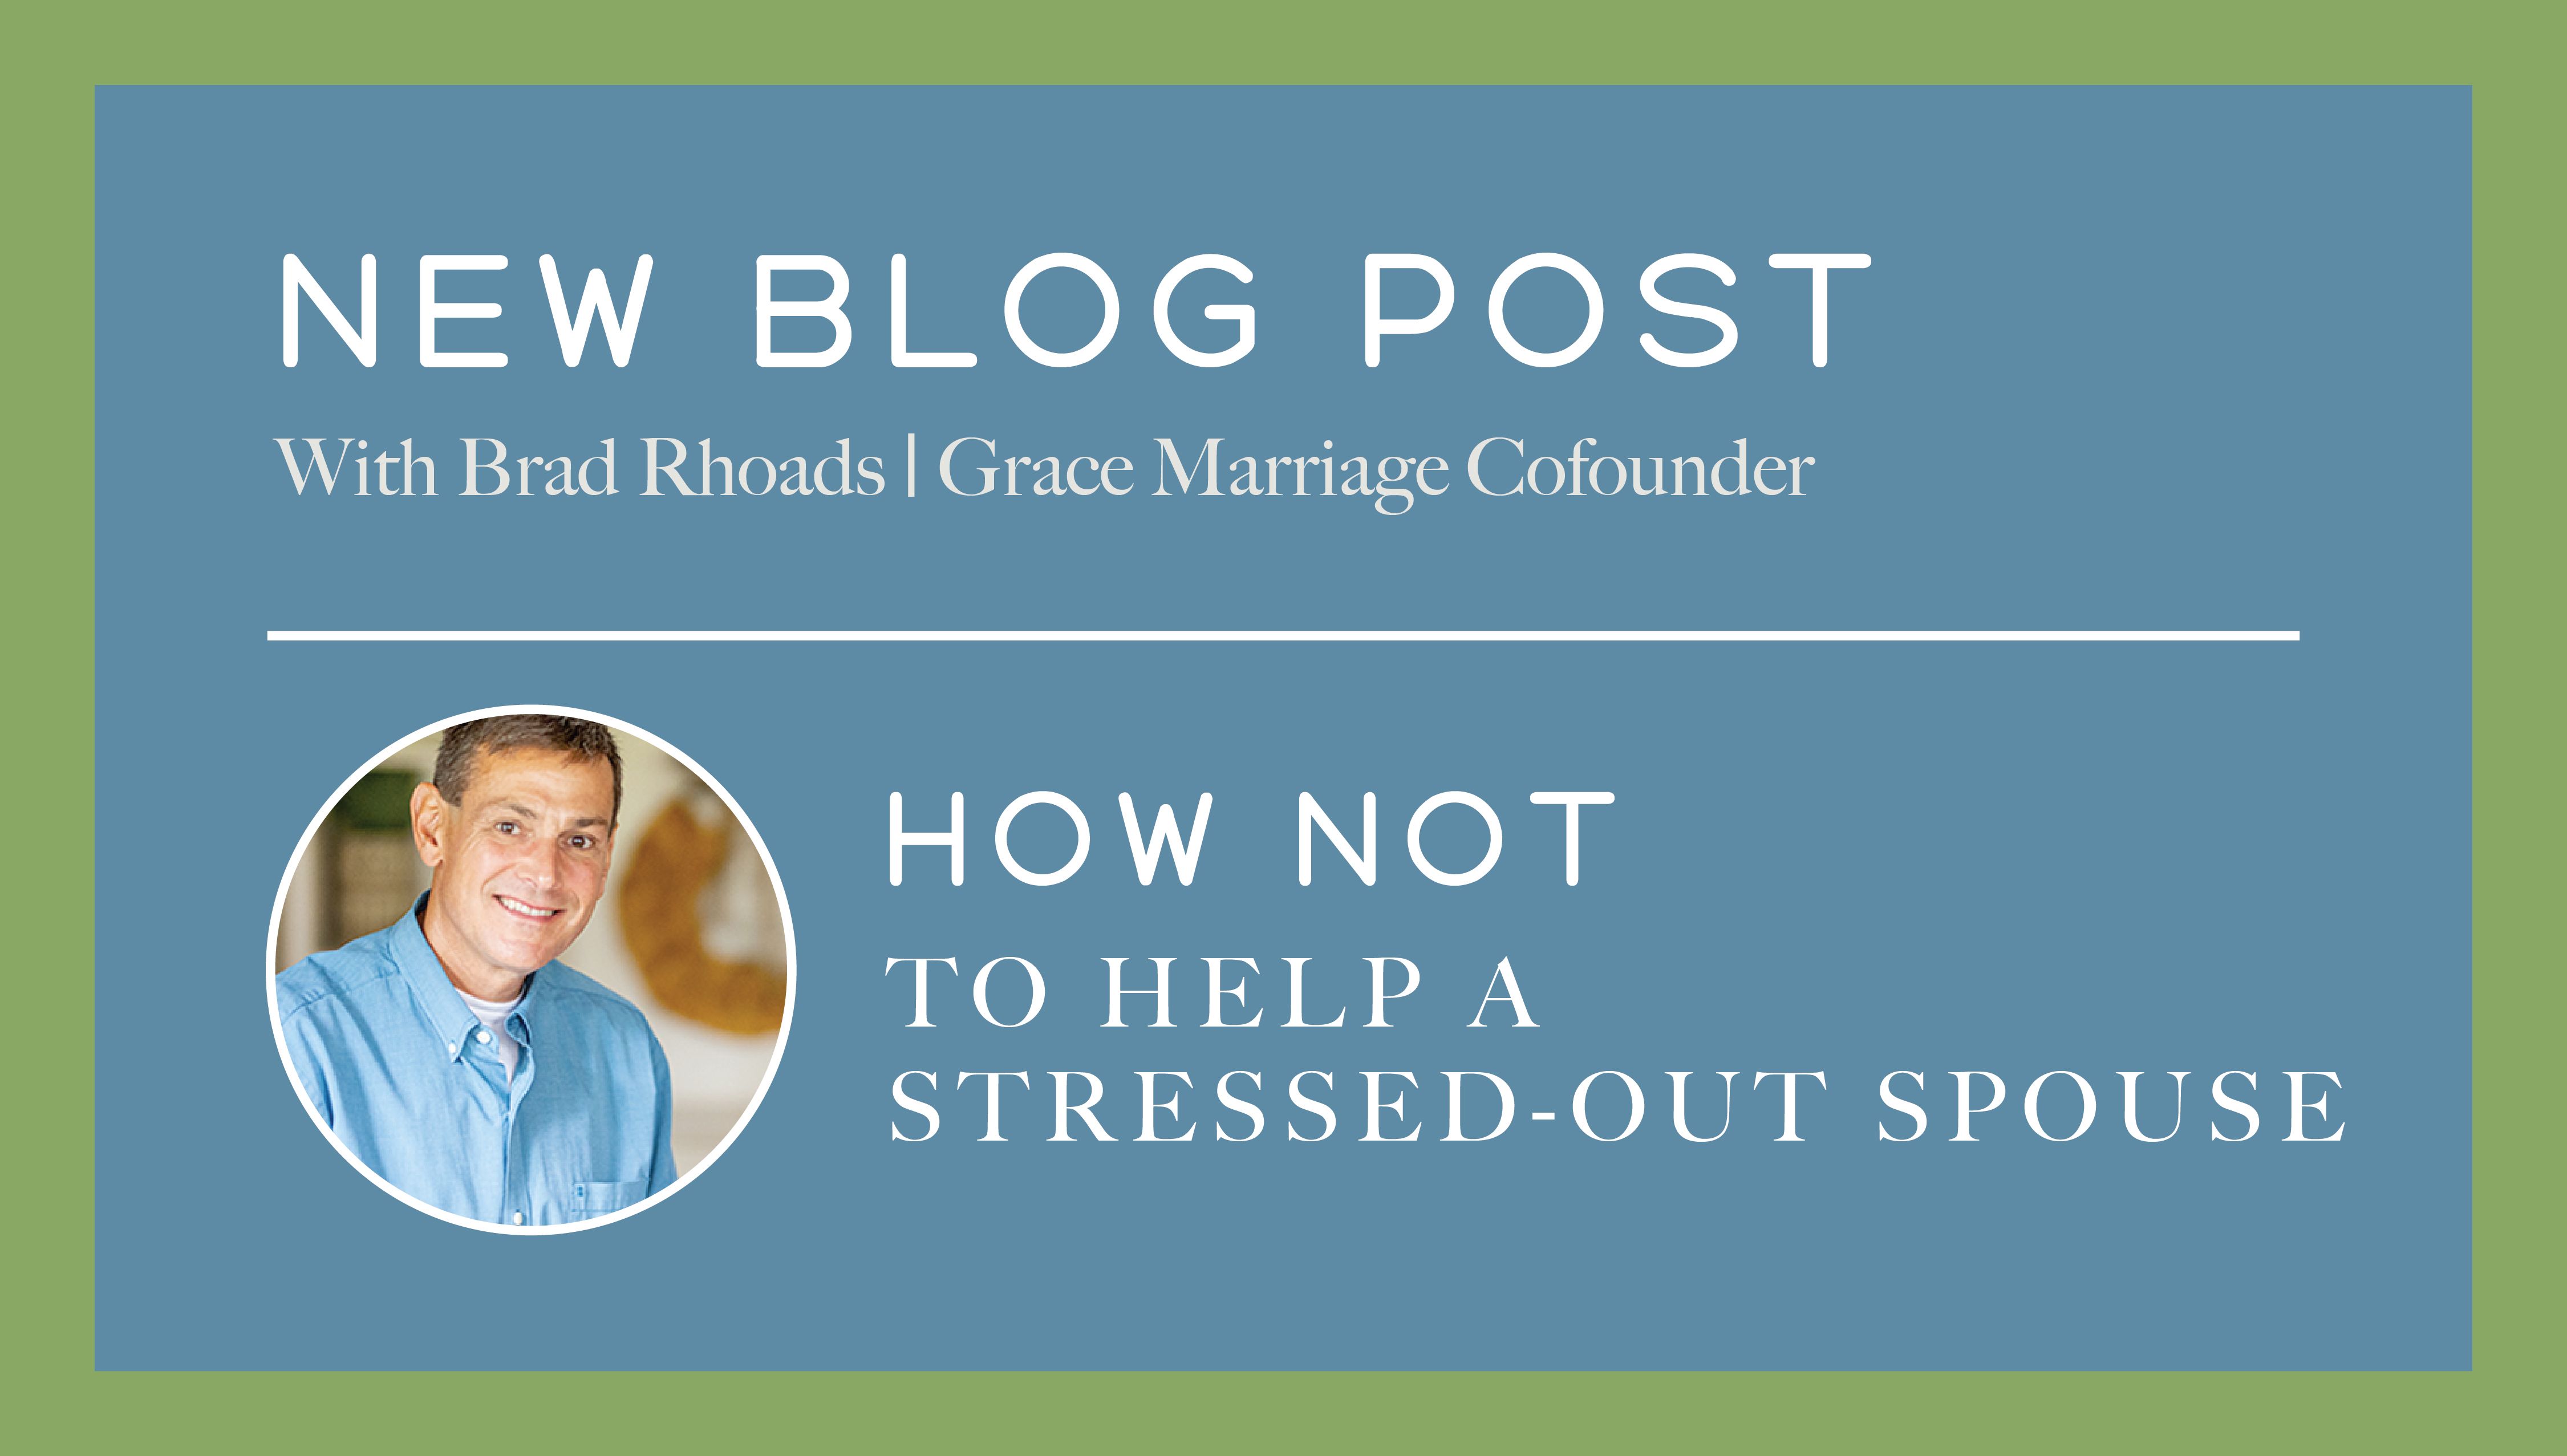 How Not to Help a Stressed-Out Spouse